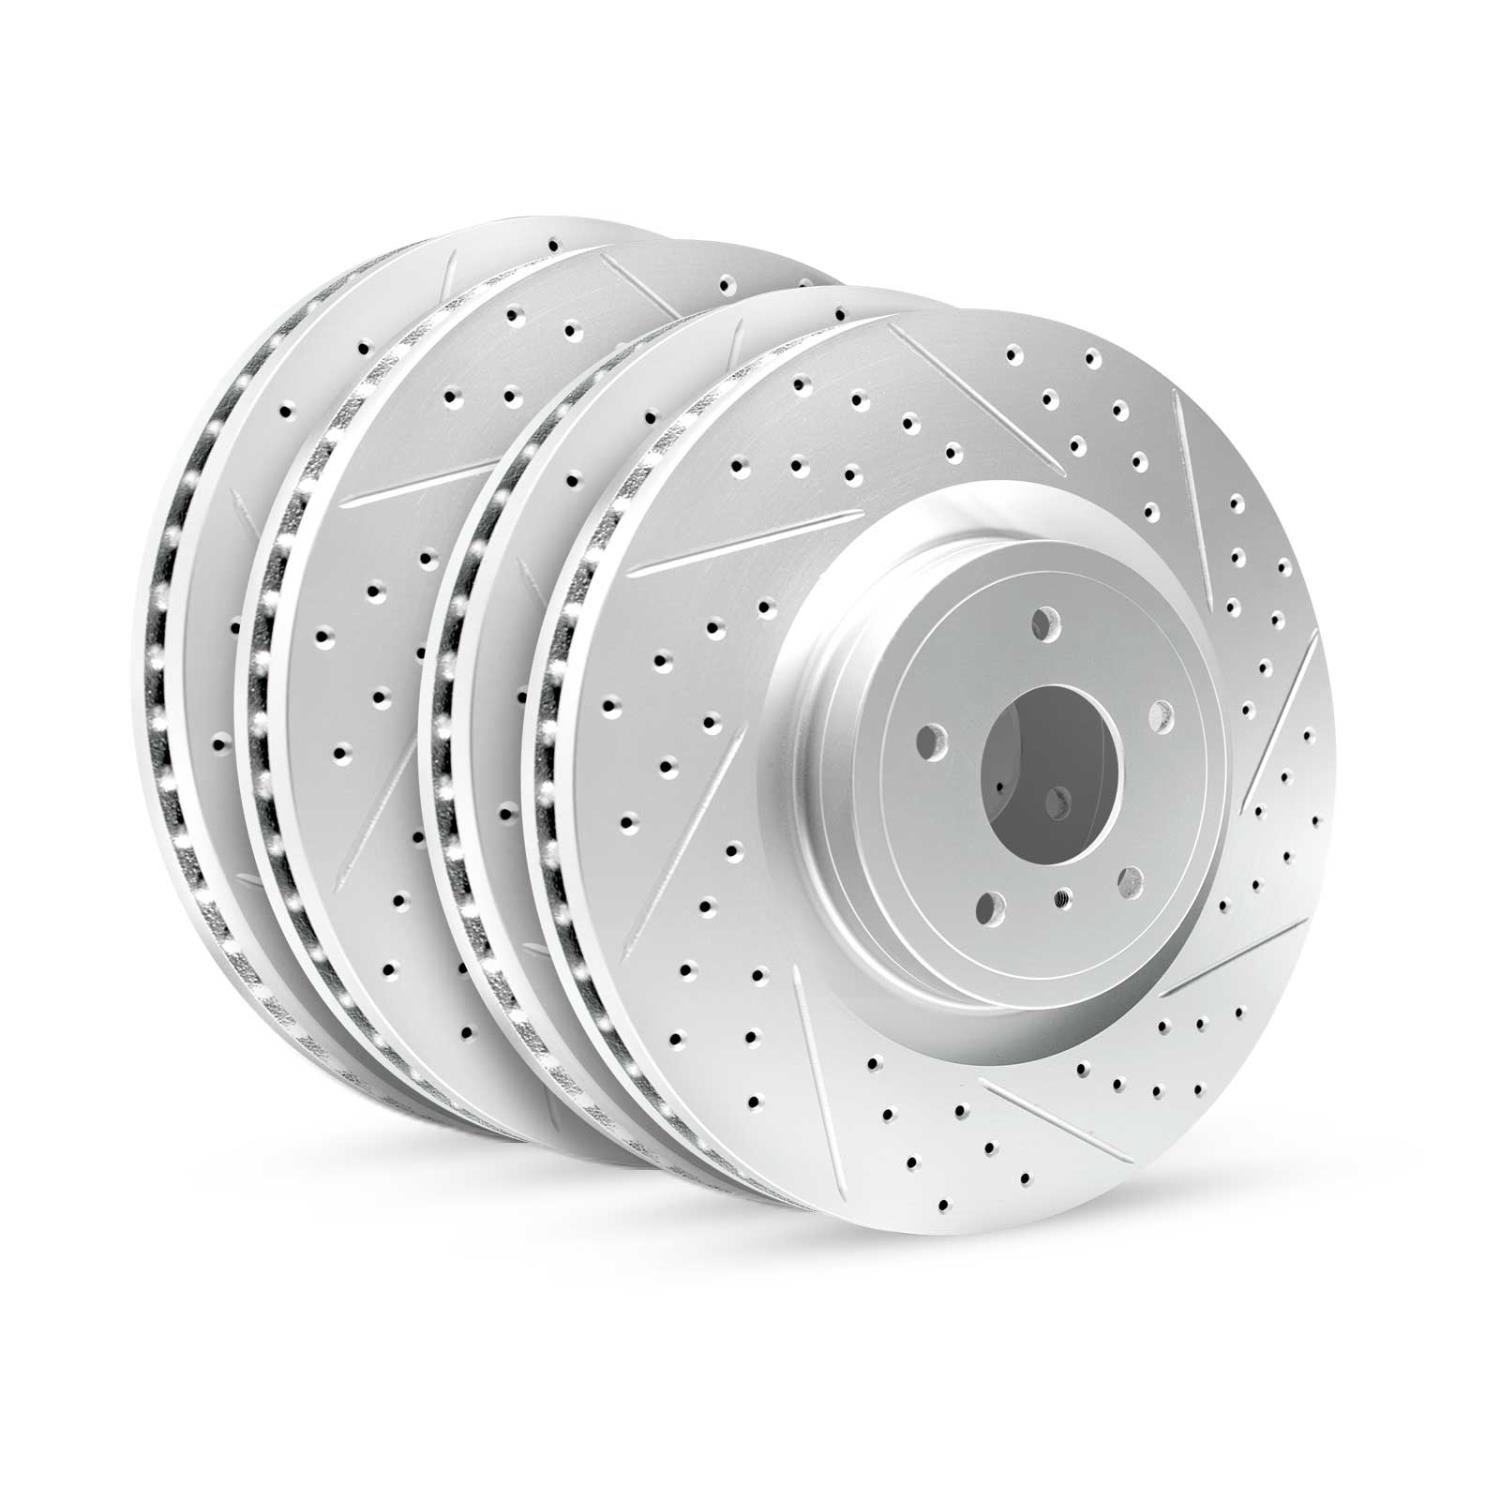 GEO-Carbon Drilled/Slotted Rotors, 2013-2014 Ford/Mazda, Position: Front/Rear